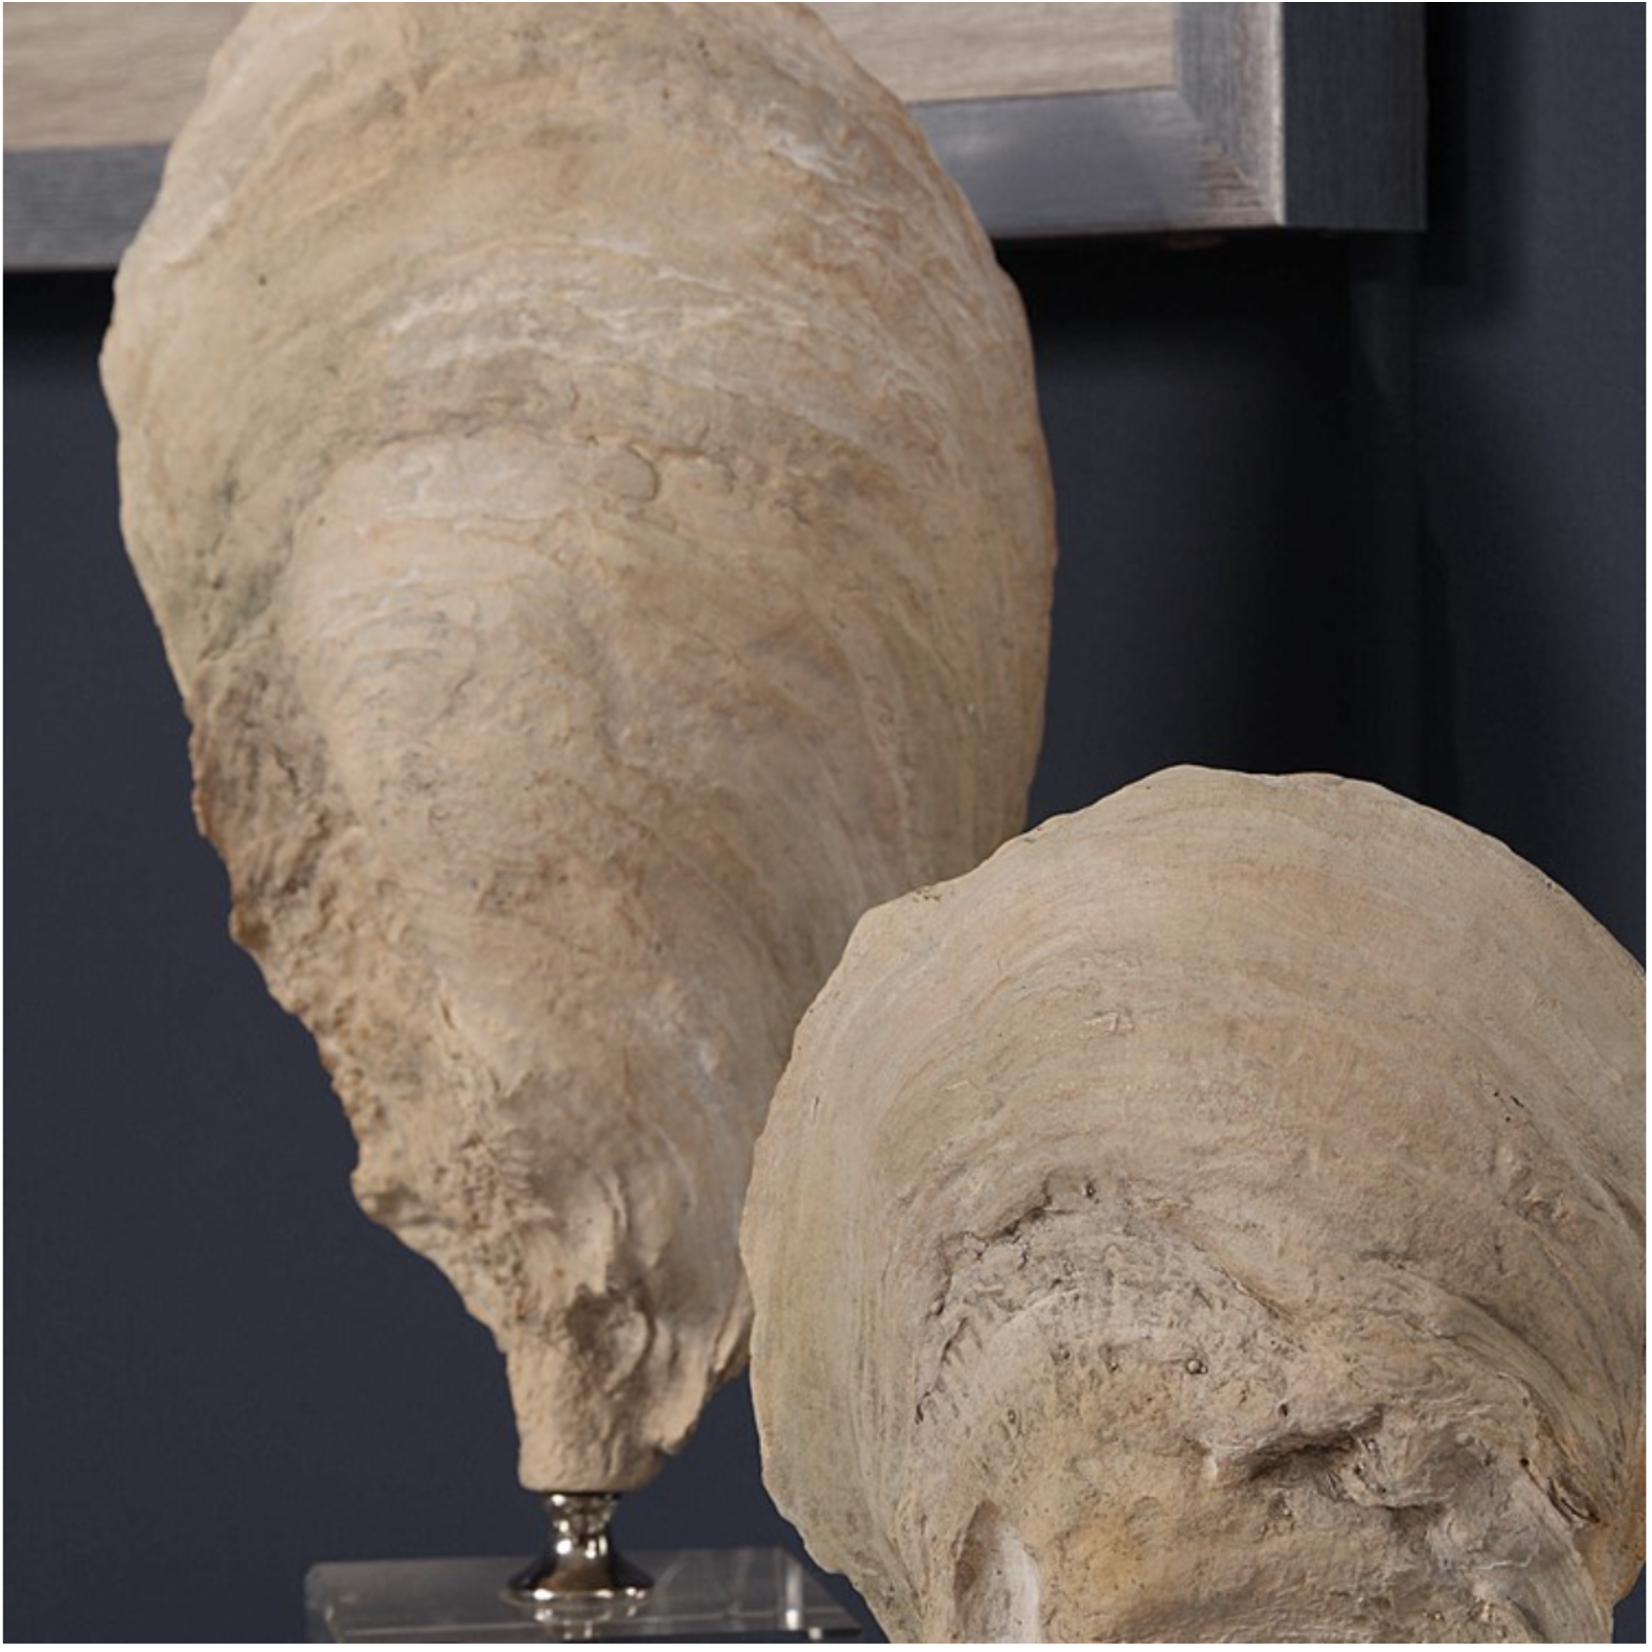 Outside The Box 15" & 11" Set Of 2 Oyster Natural Shell Sculptures